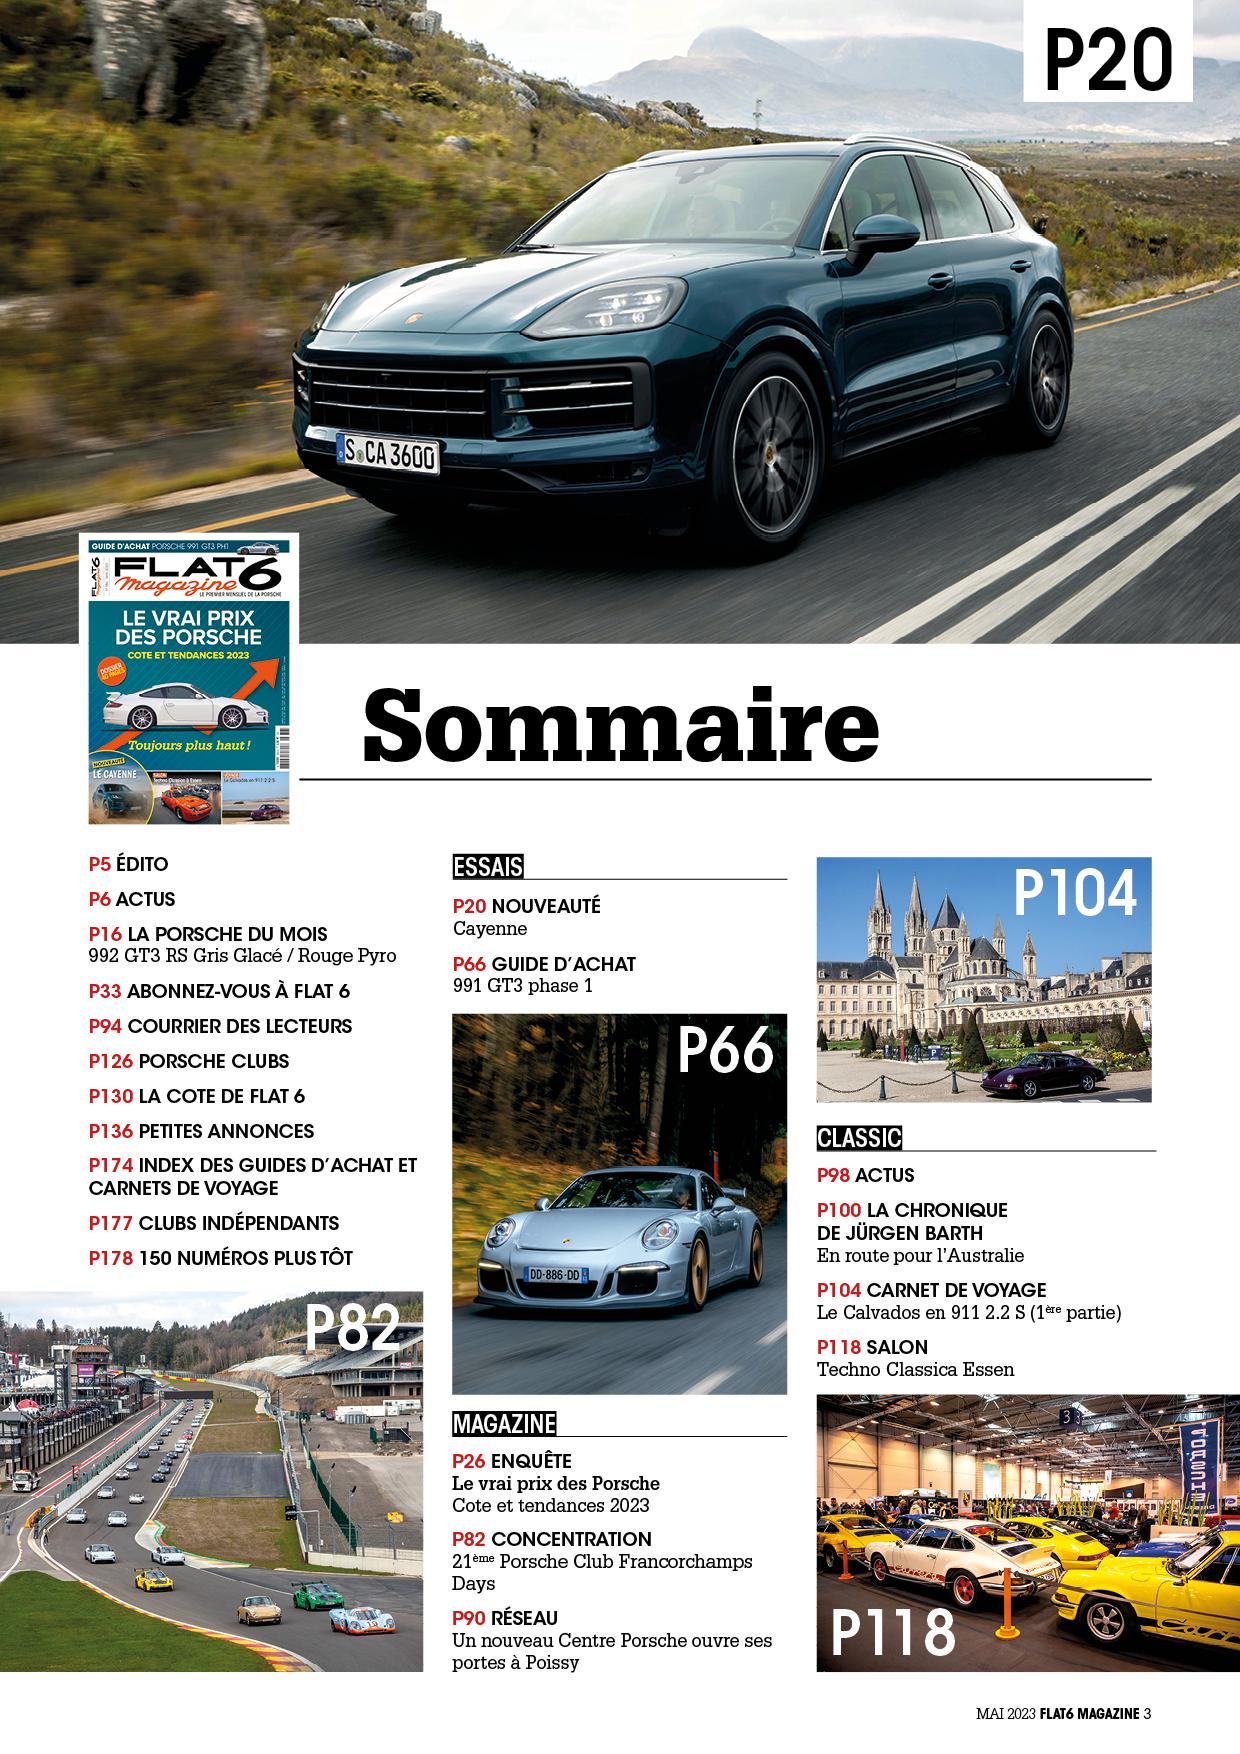 Sommaire386